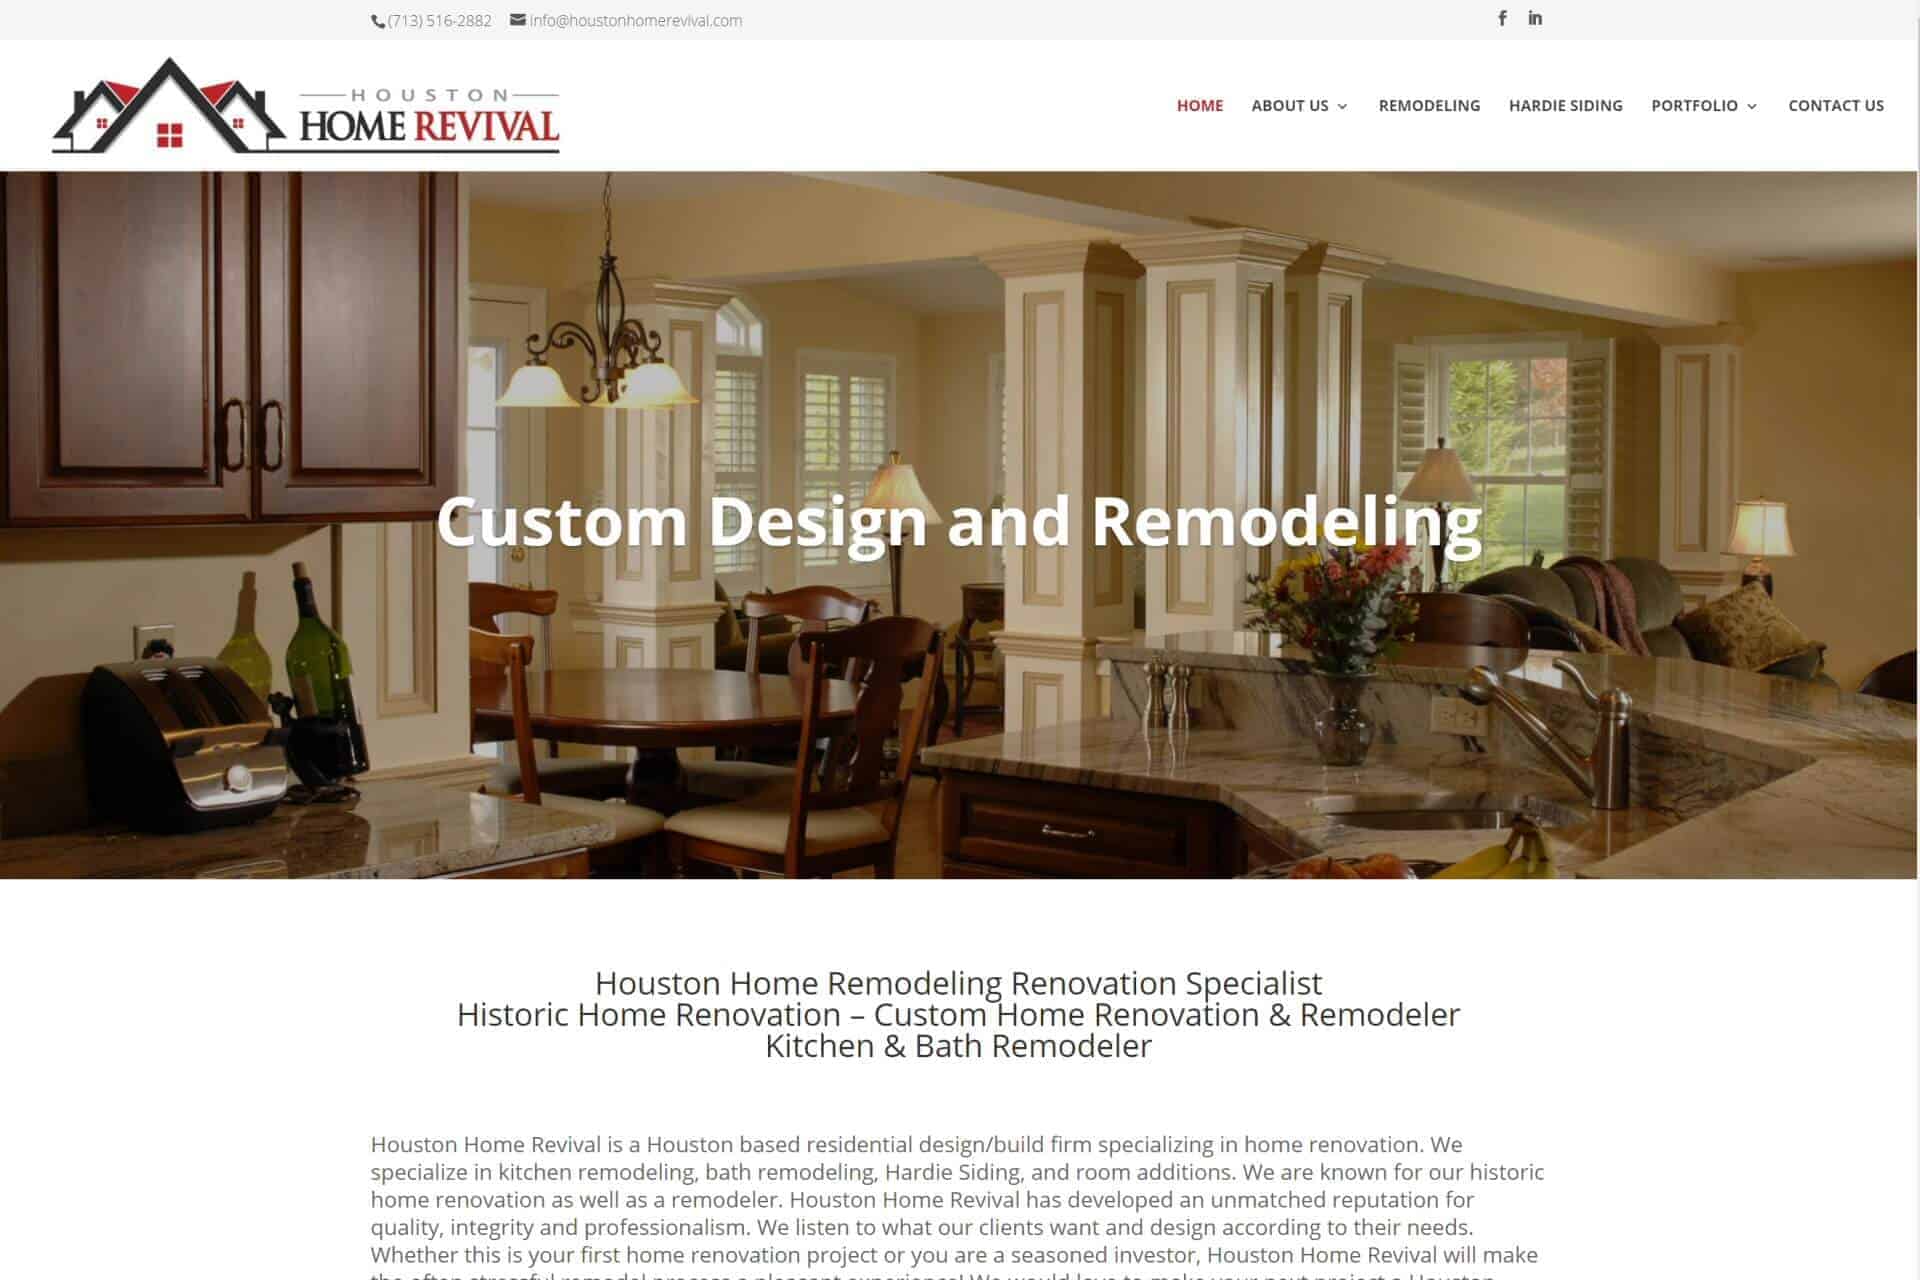 Houston Home Revival Home Remodeling & Renovation by All Star Pools